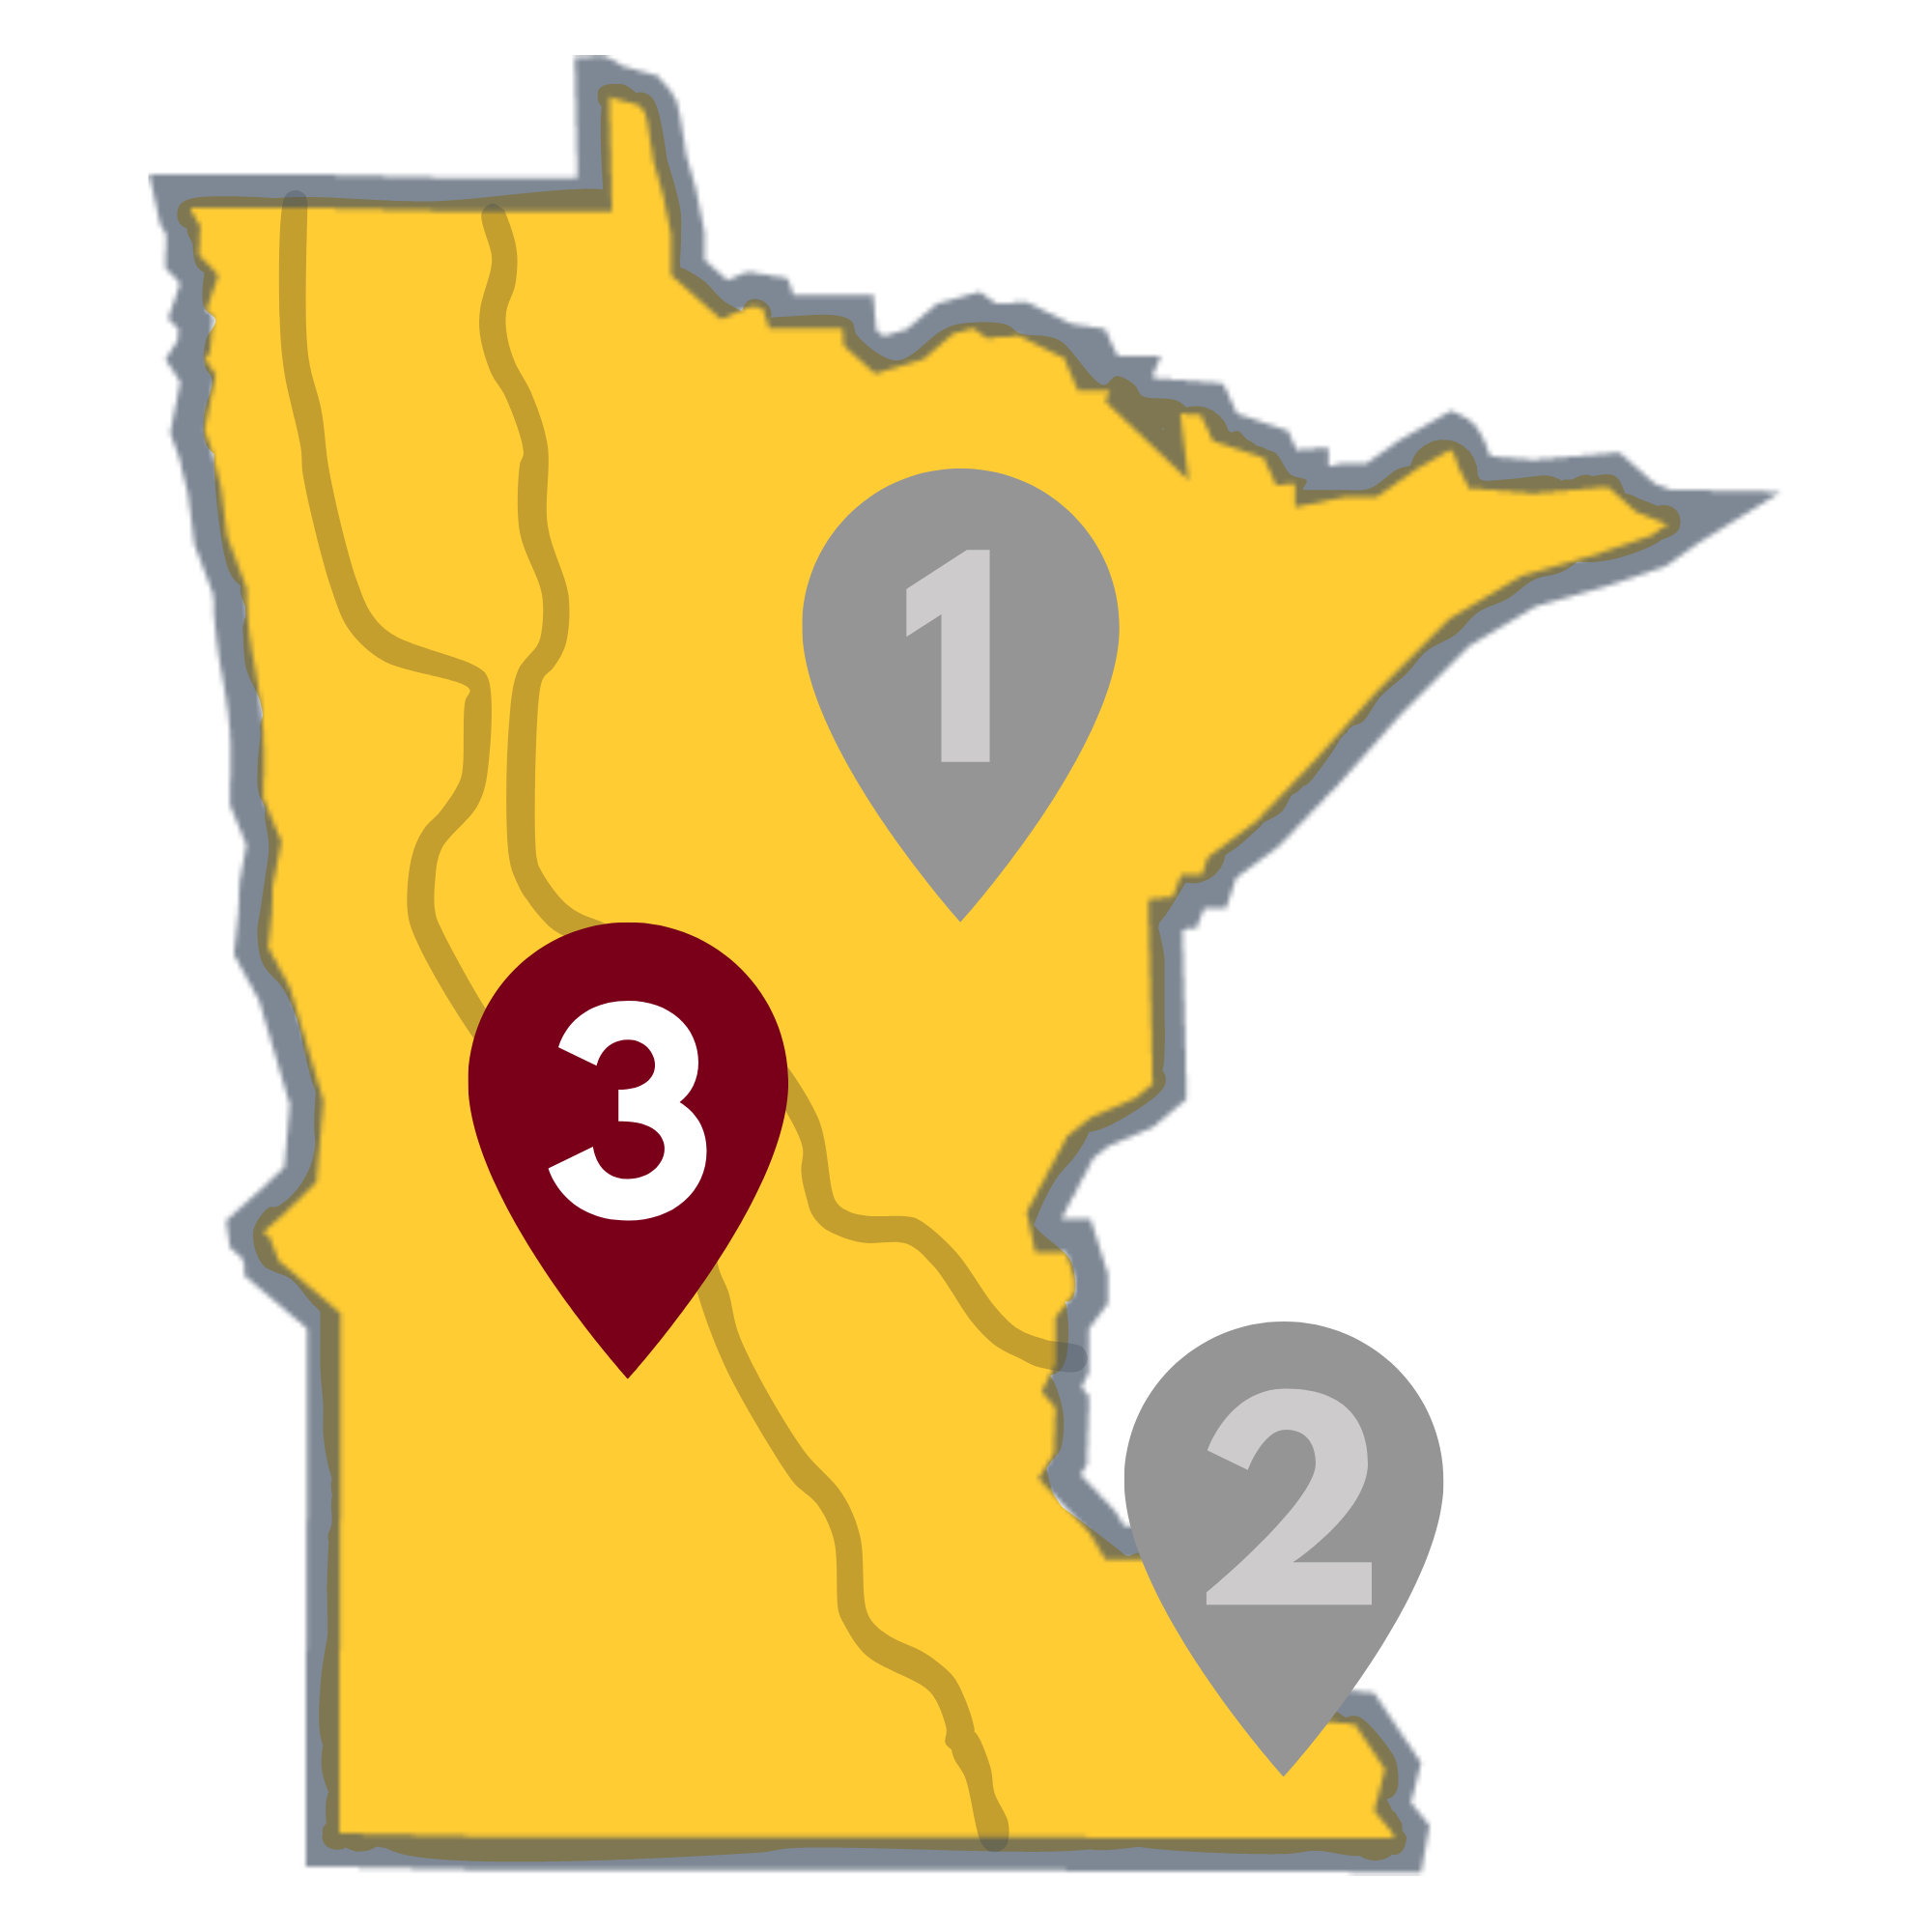 Yellow state of Minnesota with a maroon place marker (3) in the west